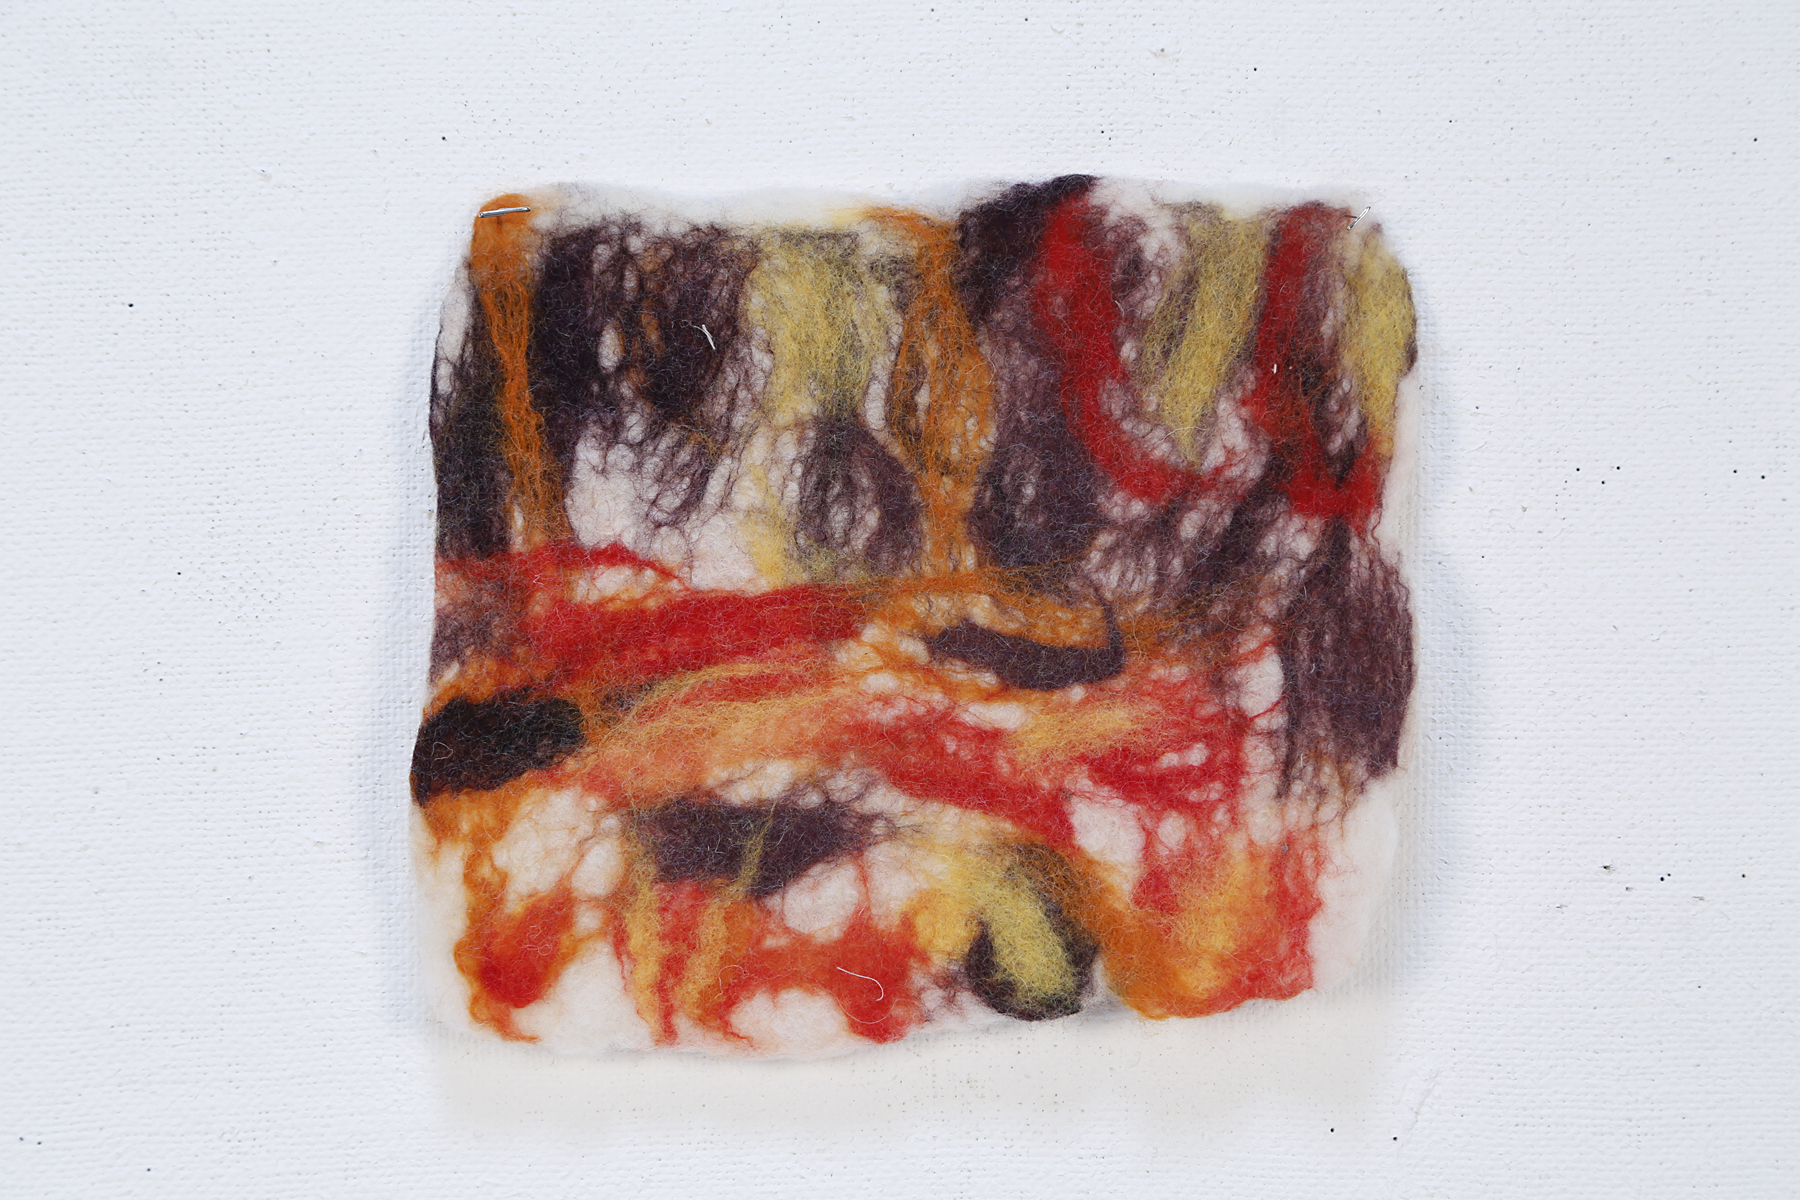 Dark purple, orange, yellow and red fibers blend together as wisps against a white background